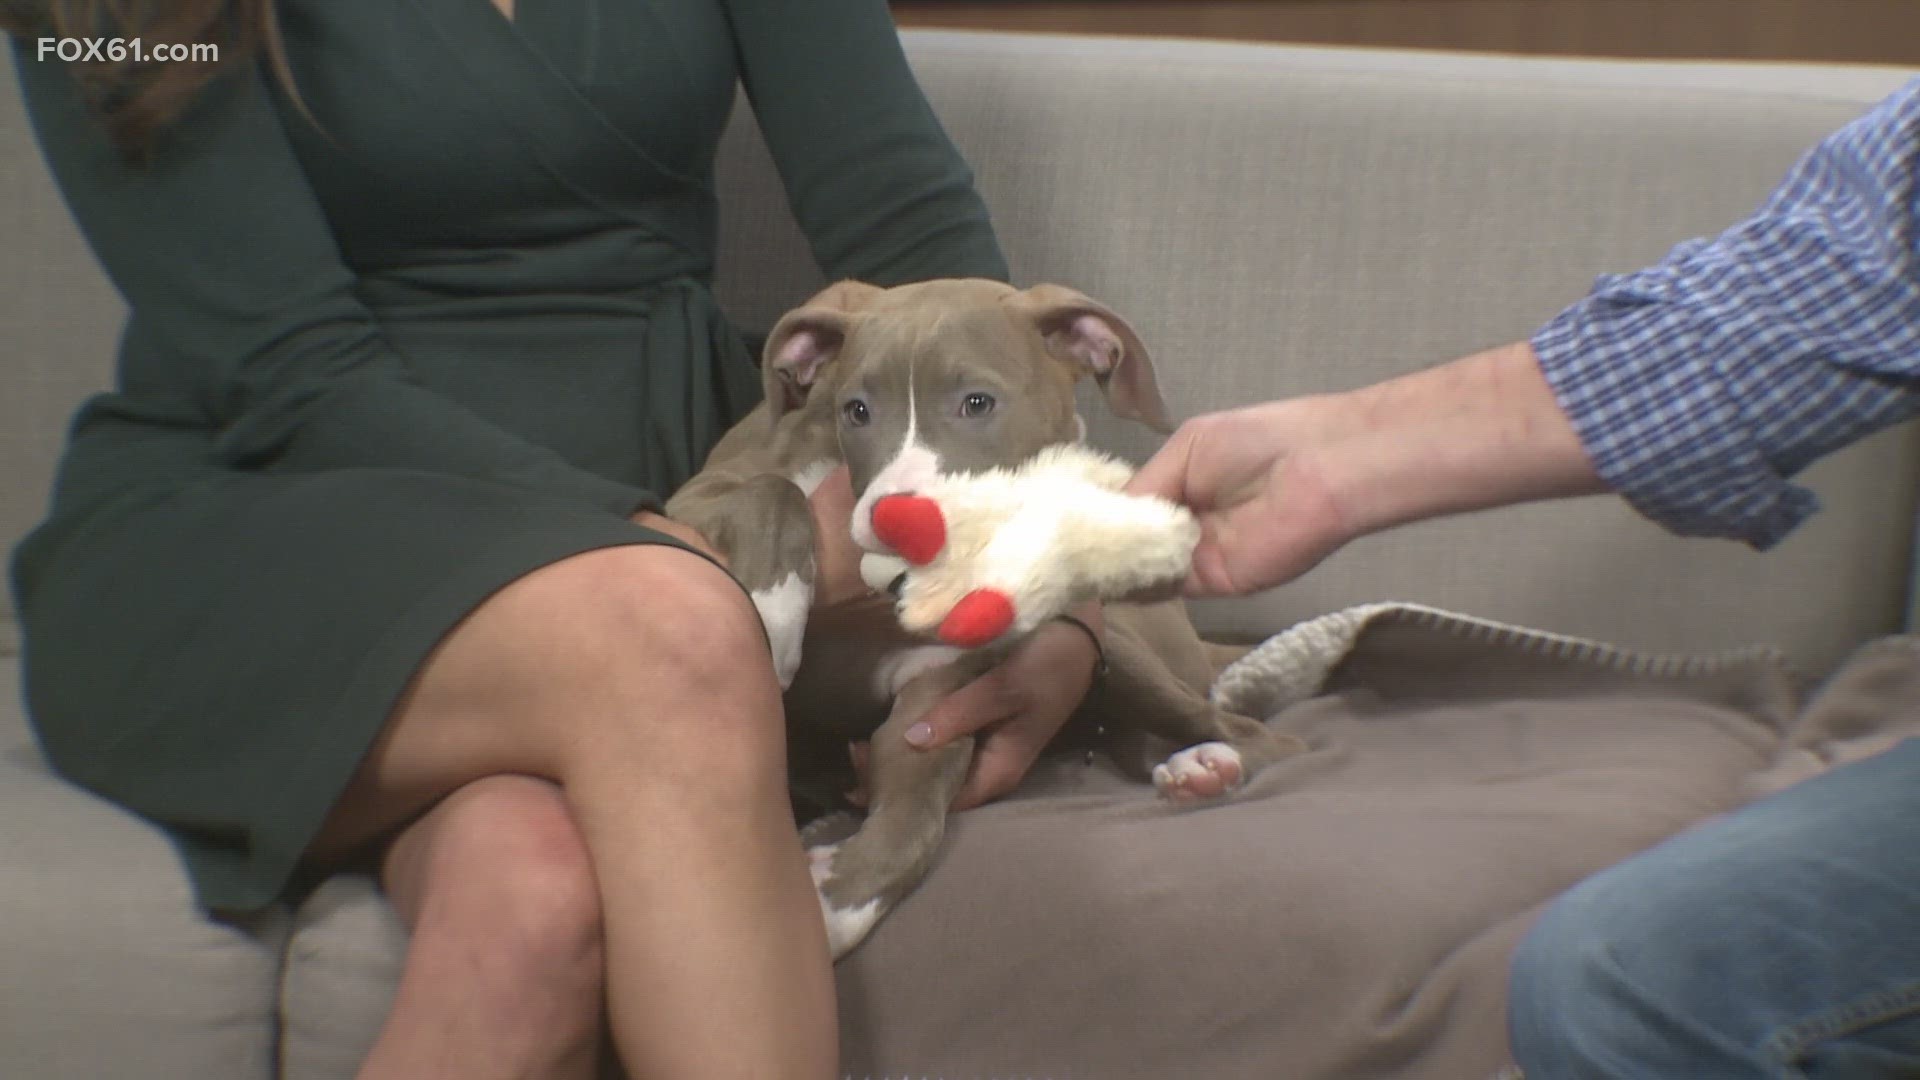 Octavia is one of three who came to the Connecticut Humane Society after her owners had to move. This puppy is looking for her forever home!